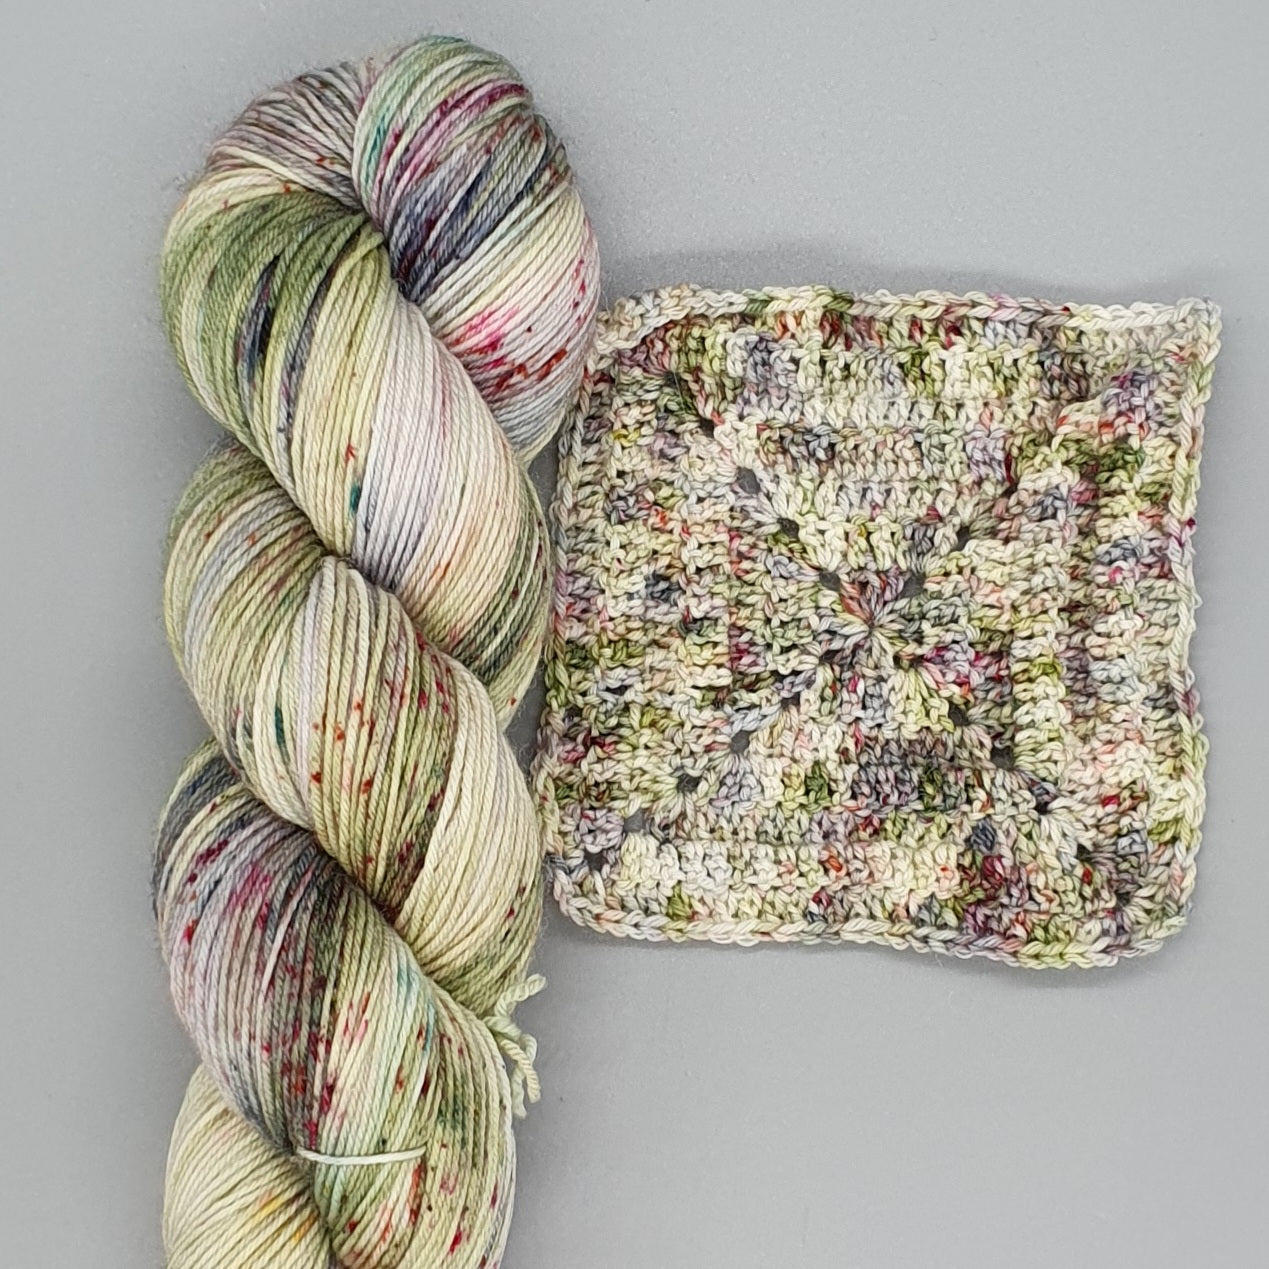 The Tale Of The Pie And The Patty-Pan - Merino Nylon 4ply